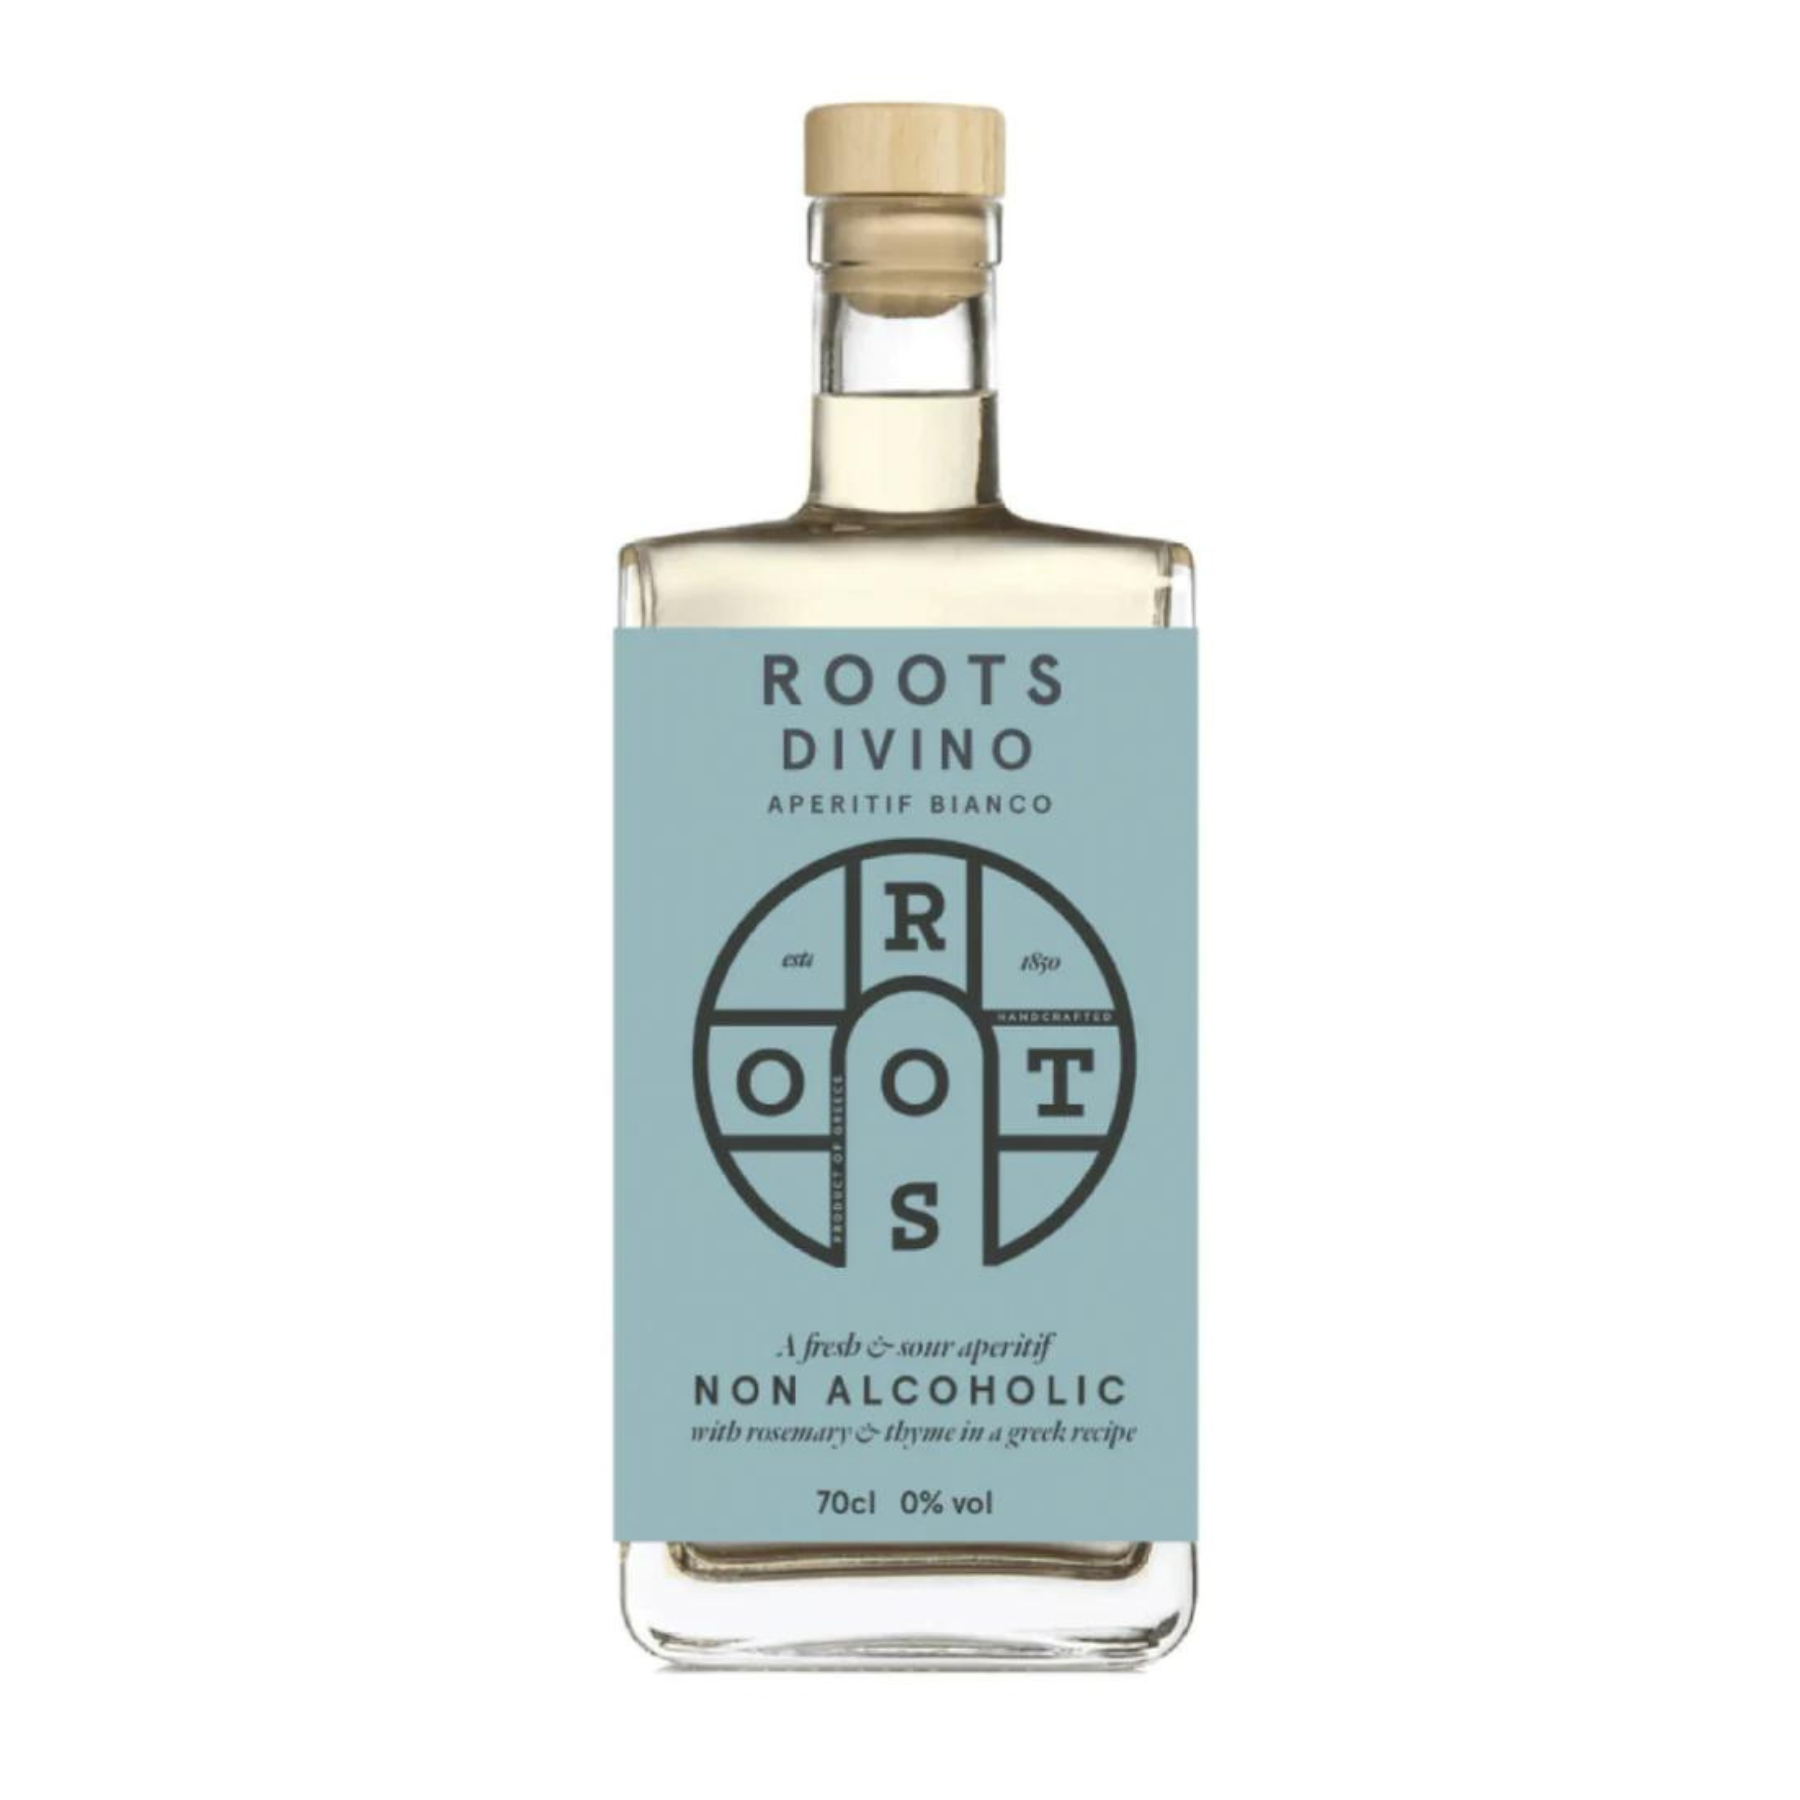 Roots Divino Bianco | Non-Alcoholic Vermouth